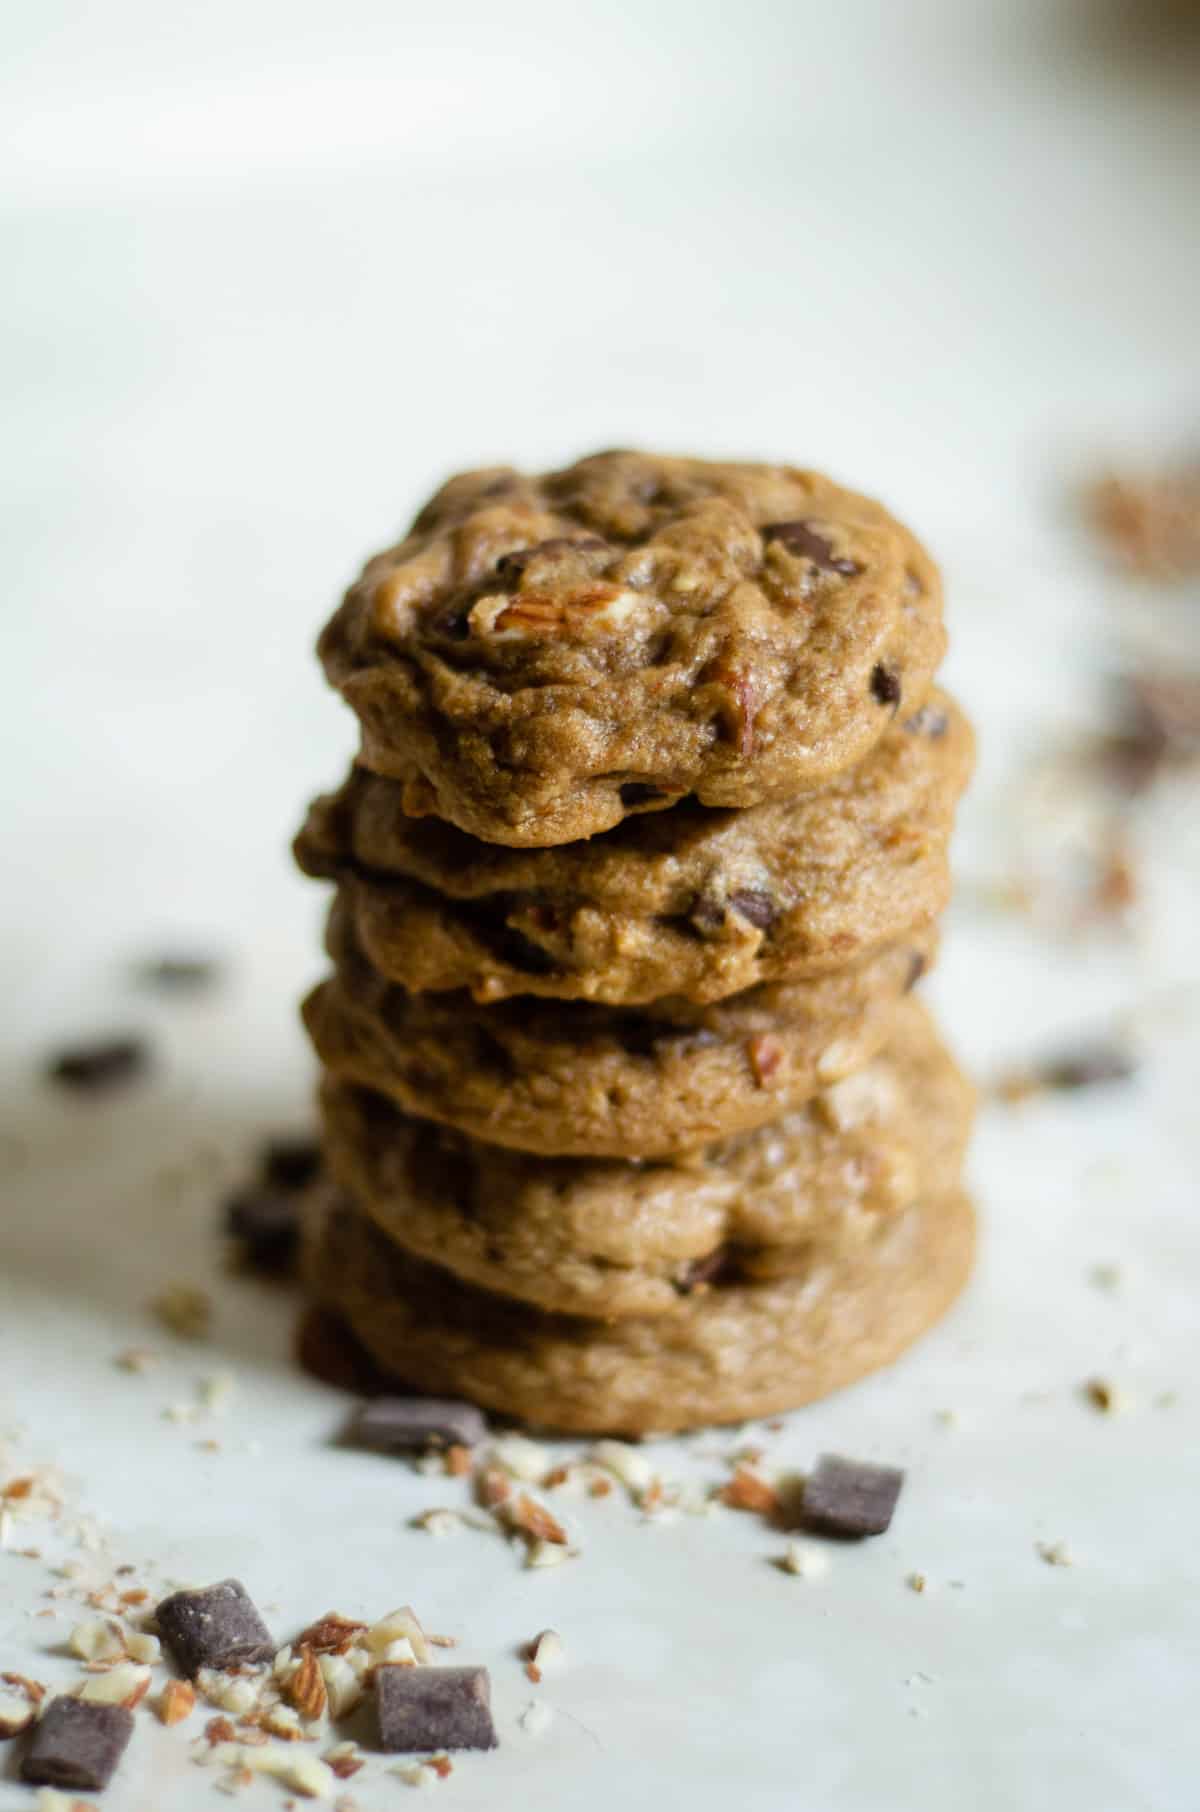 5 olive oil cookies stacked, showing chocolate and almonds.